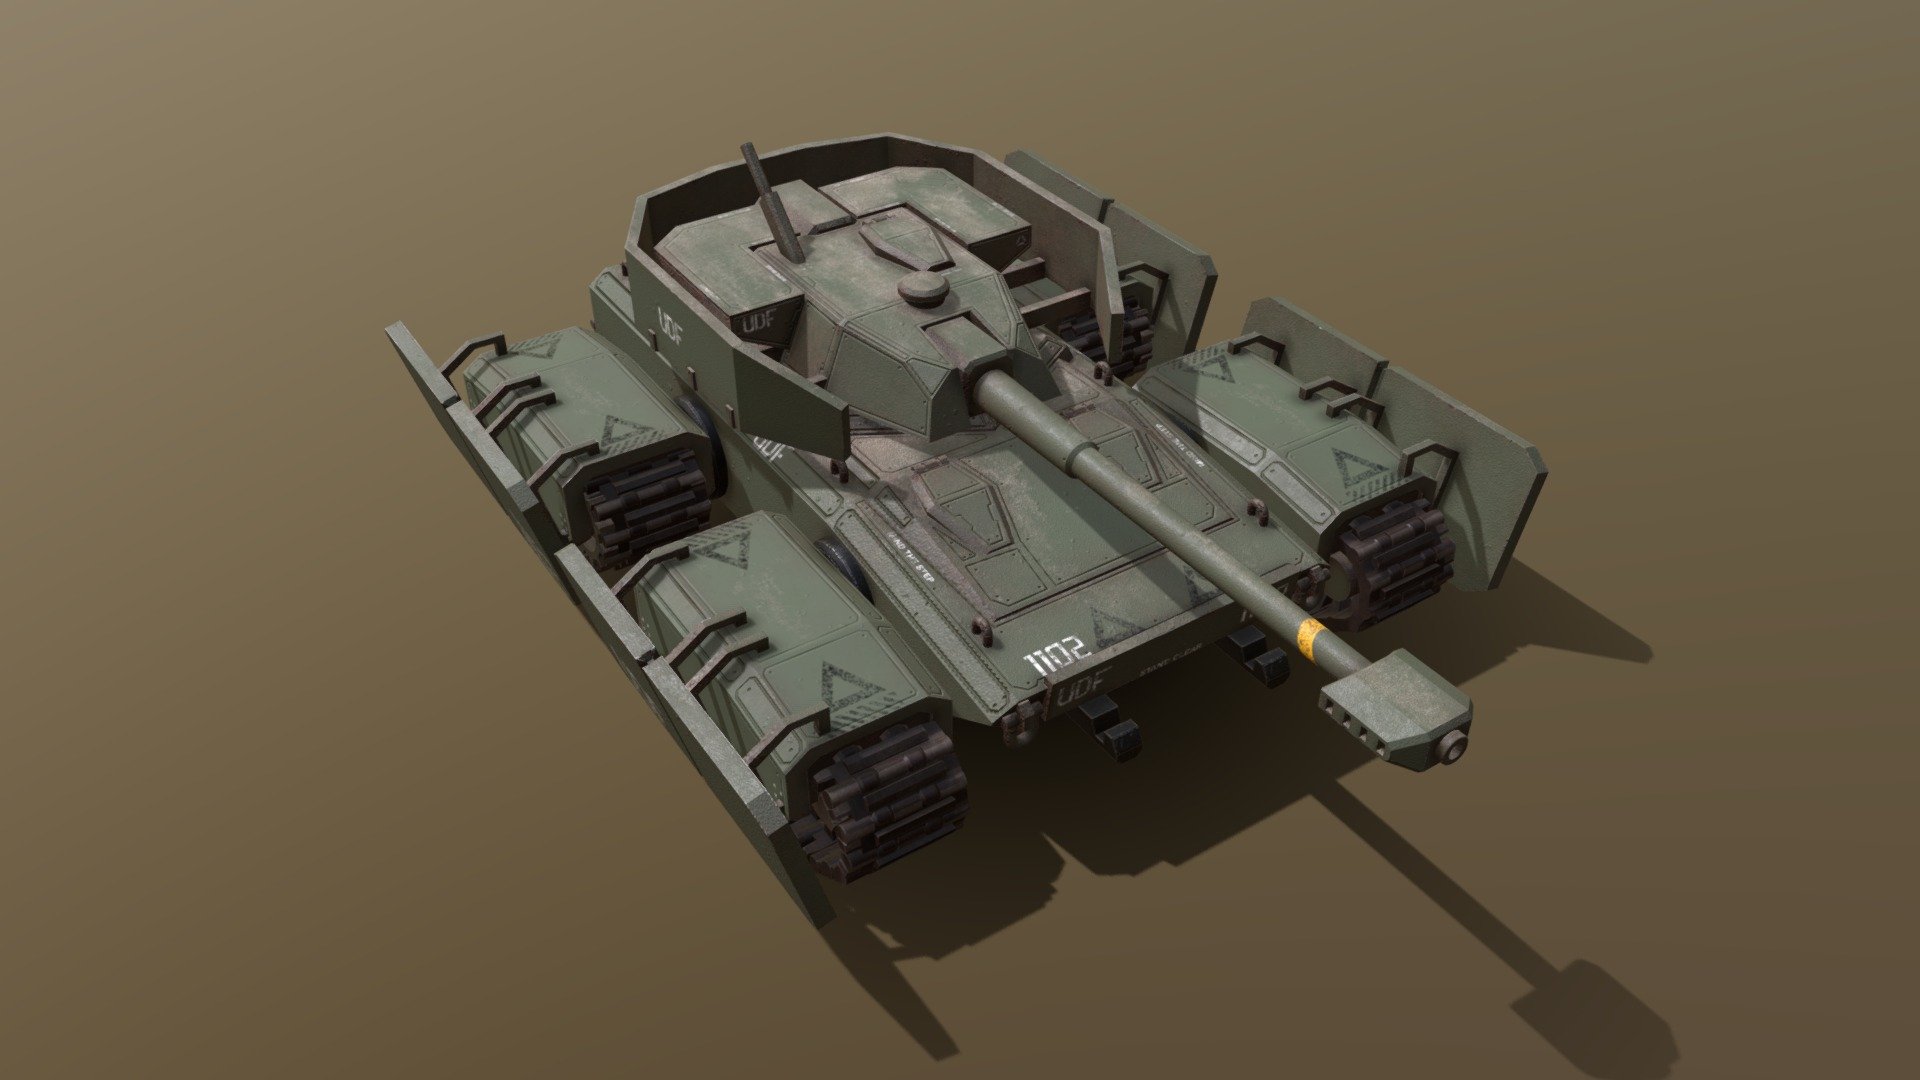 I made this model for my own personal project, it's a bit of a prototype of a bunch of Tanks that I enjoy the look of!

Come around and check out my other works on YouTube:
https://www.youtube.com/c/VidovicArts101 - UDF-EDMAC-T4 - 3D model by VidovicArts (@oshjavid) 3d model